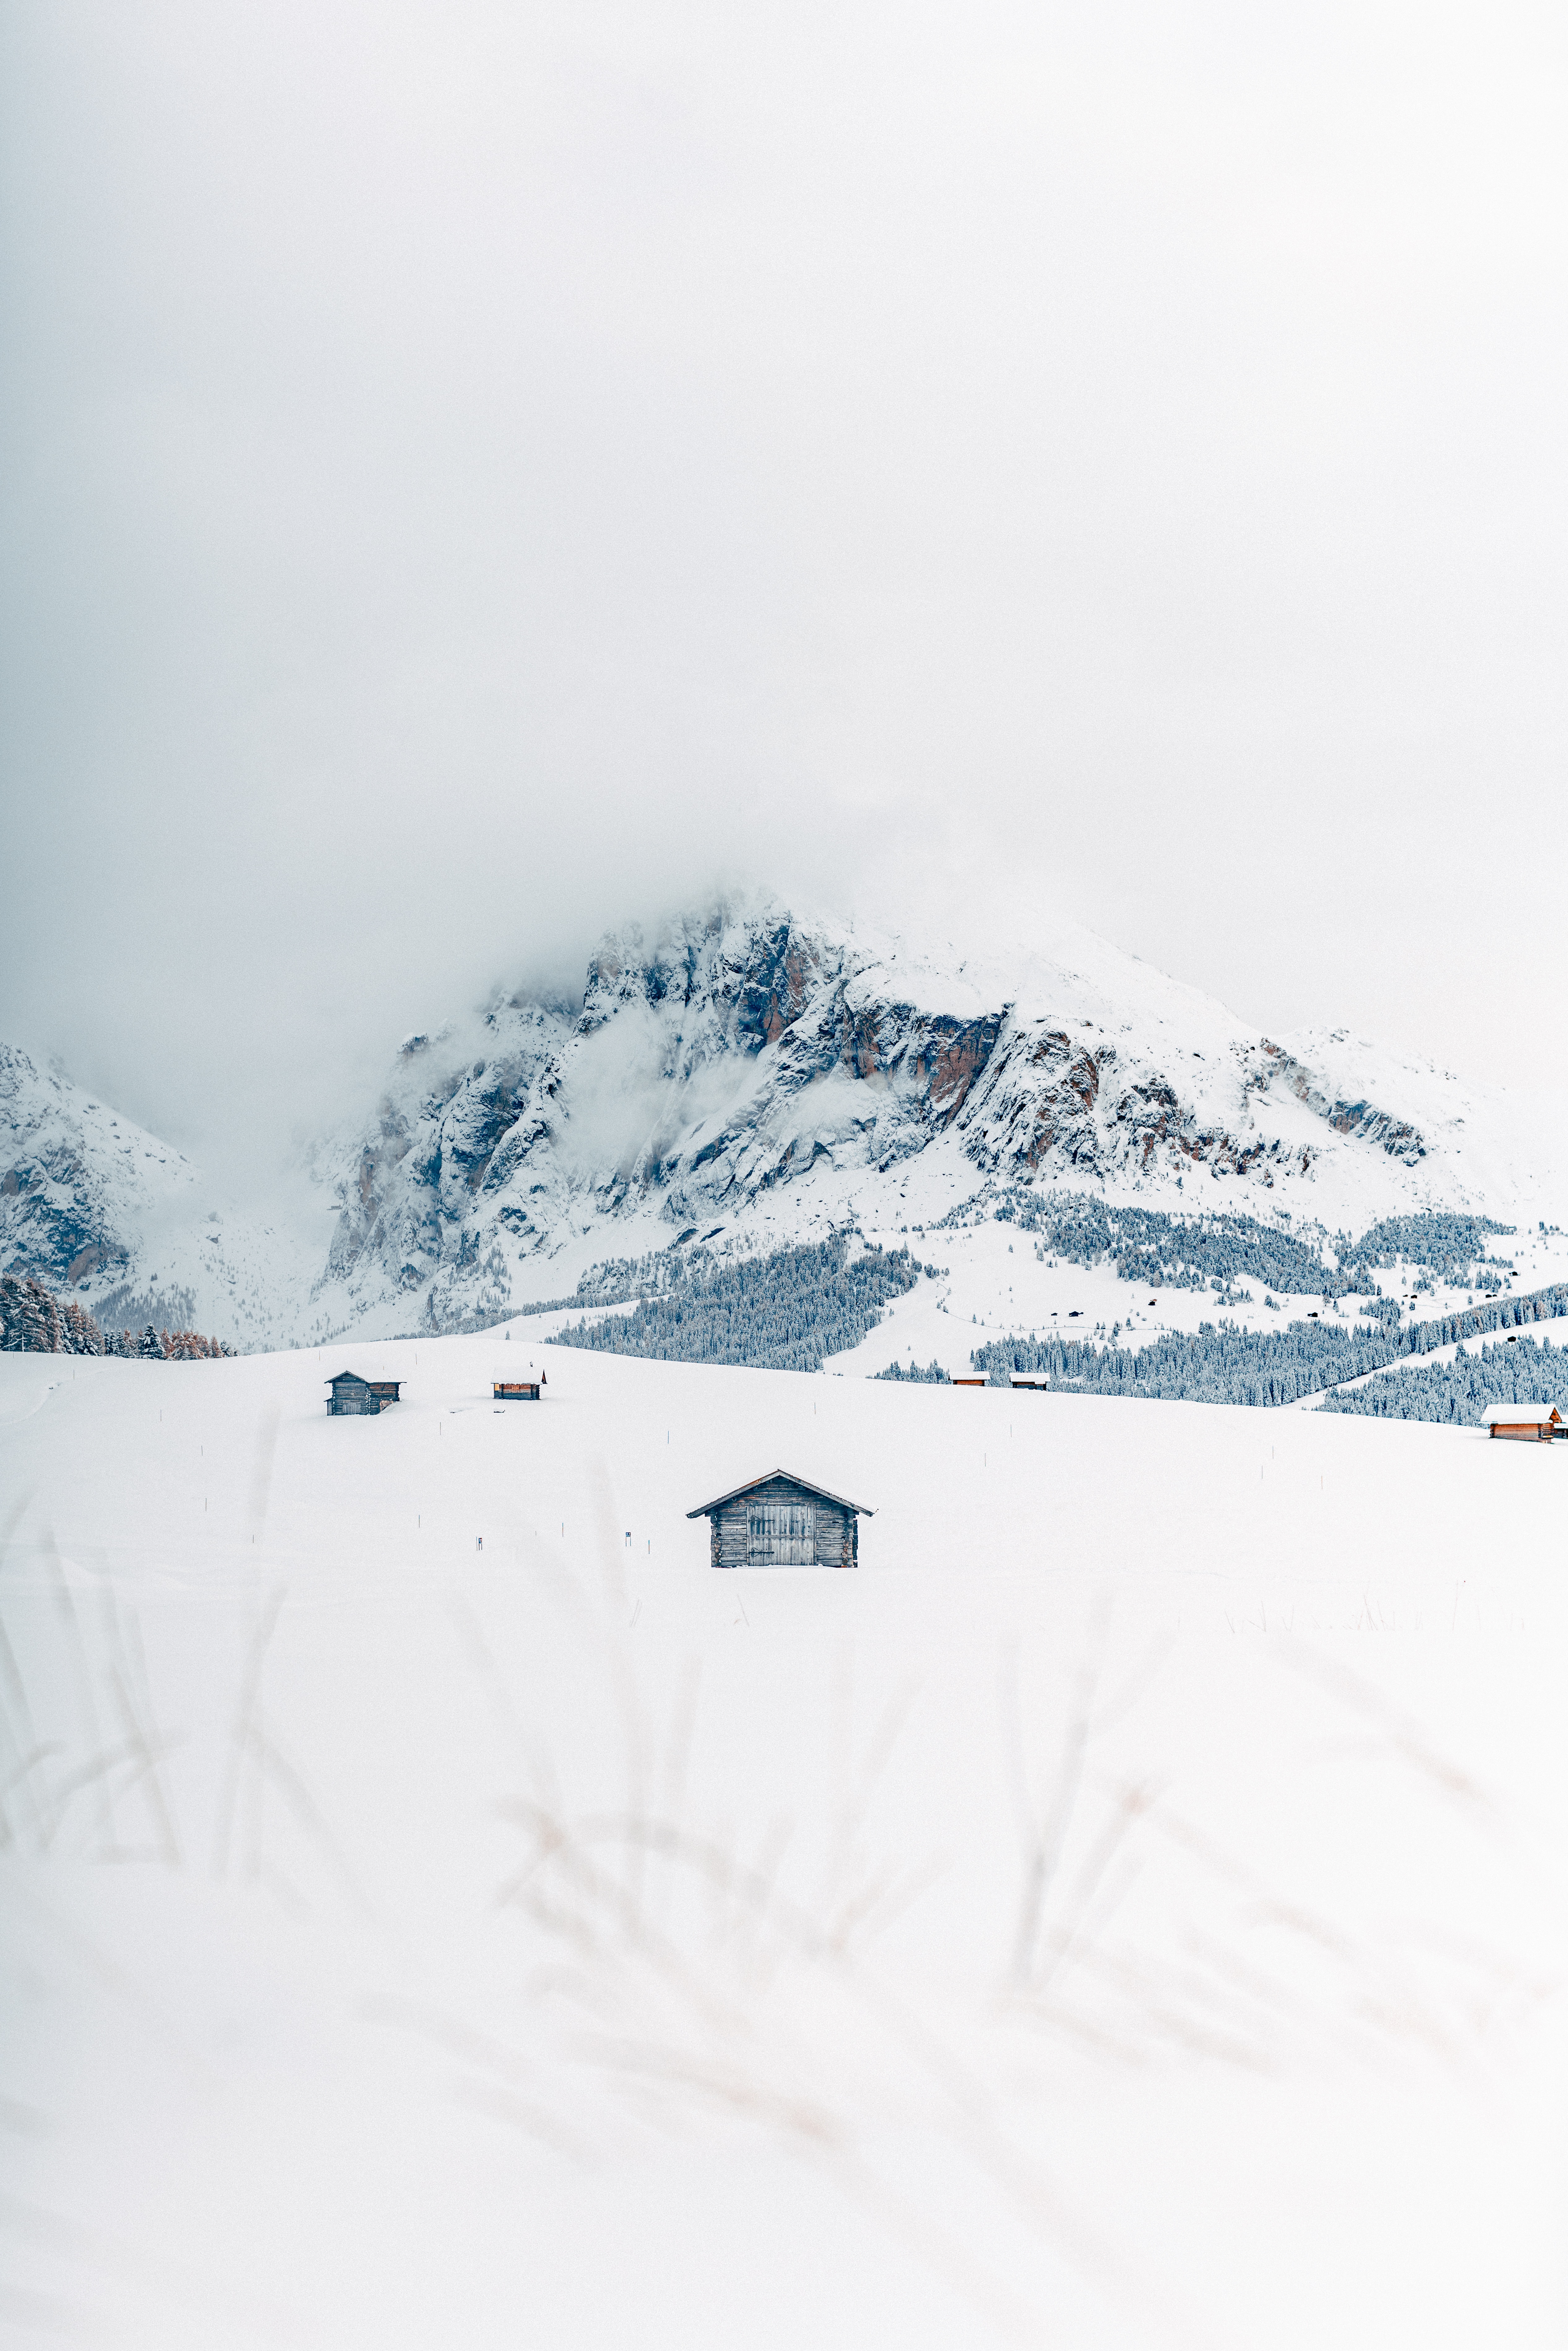 landscape, winter, nature, houses, mountains, snow, small houses Image for desktop